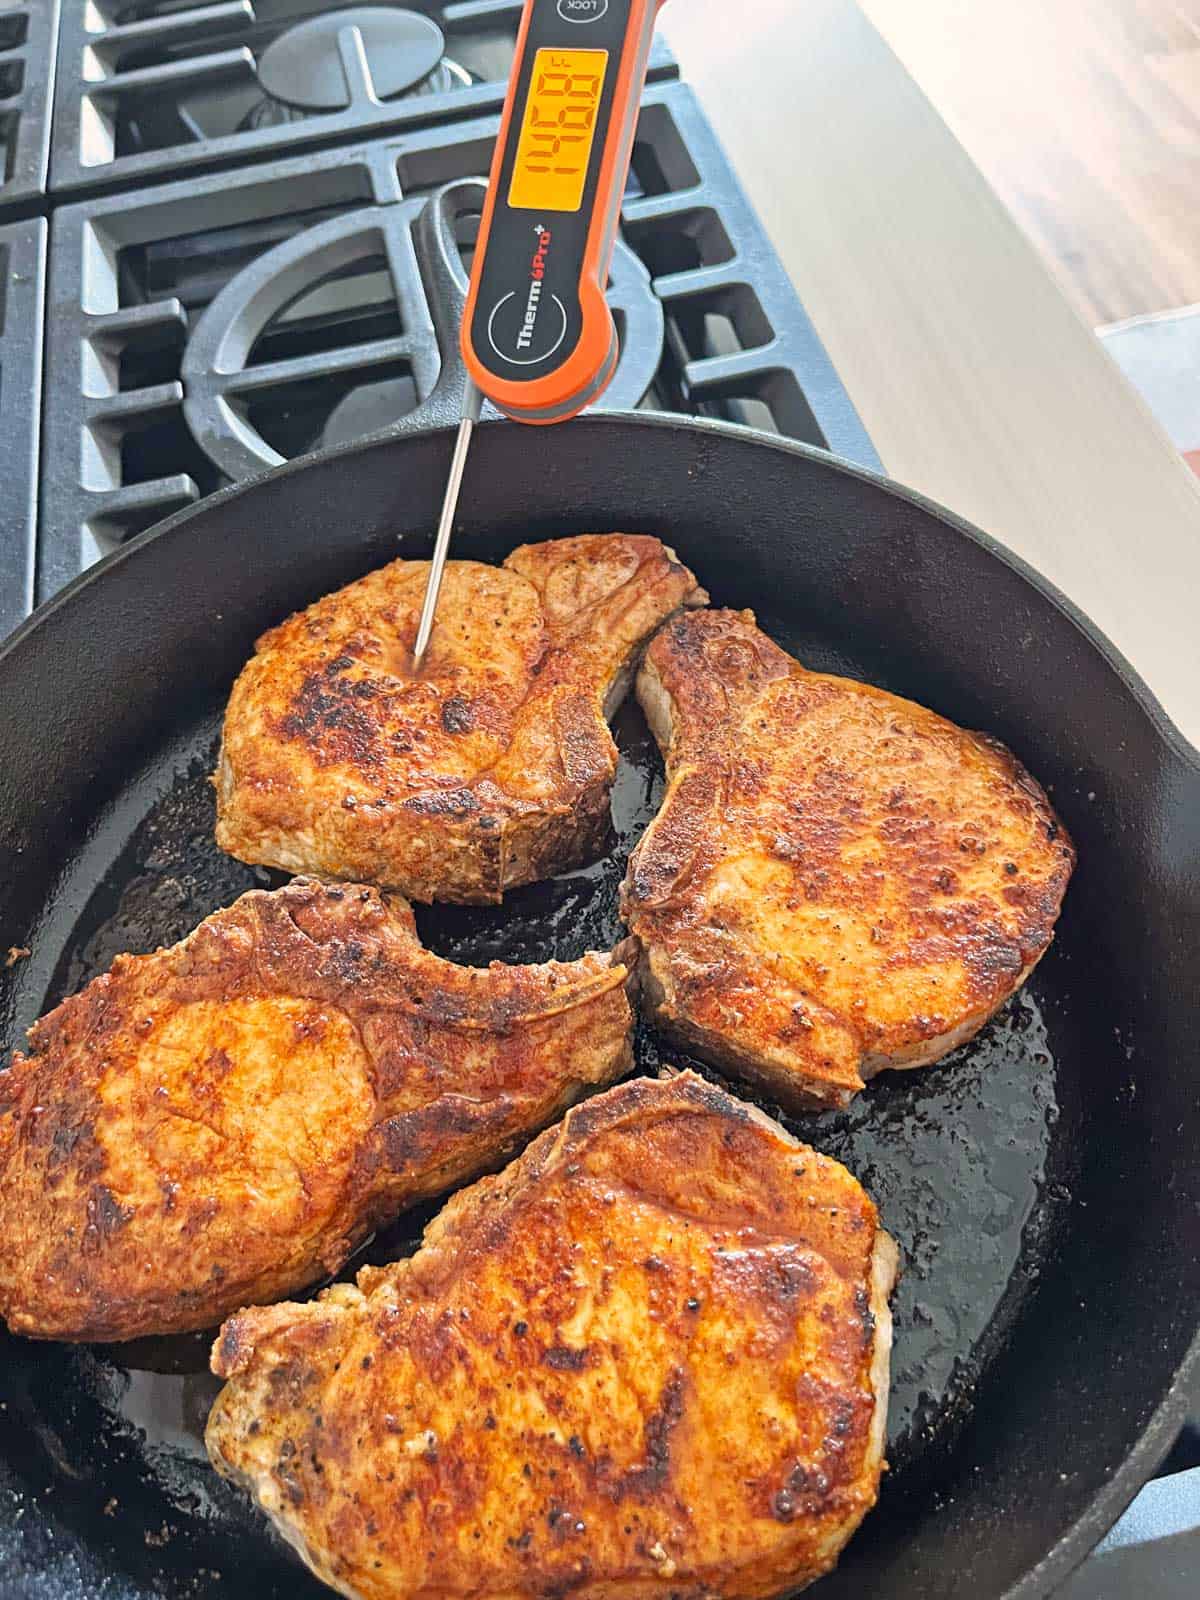 An instant-read thermometer shows that the pork chops have reached a temperature of 146.8°F.